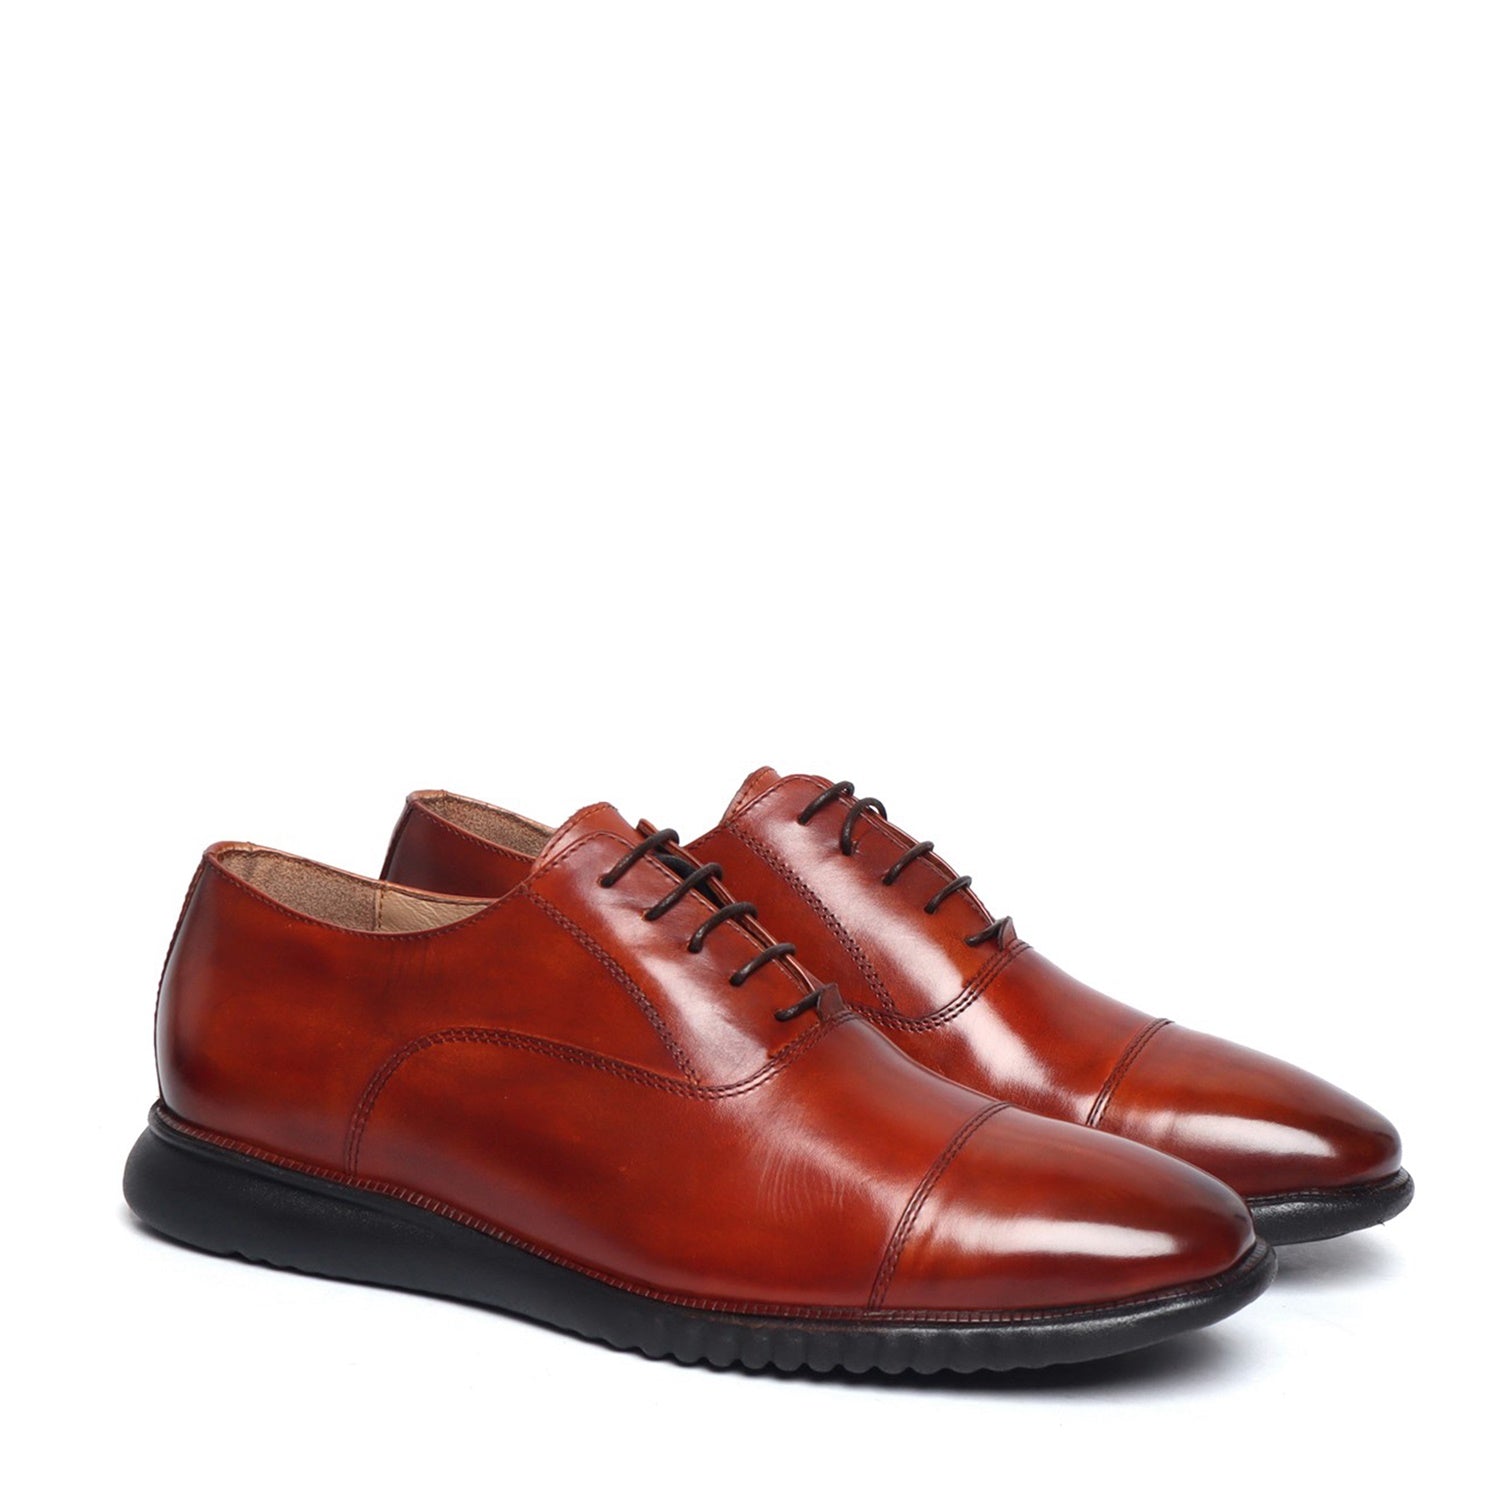 Light Weight Police Uniform Shoe with Sneaker Sole in Cognac Leather